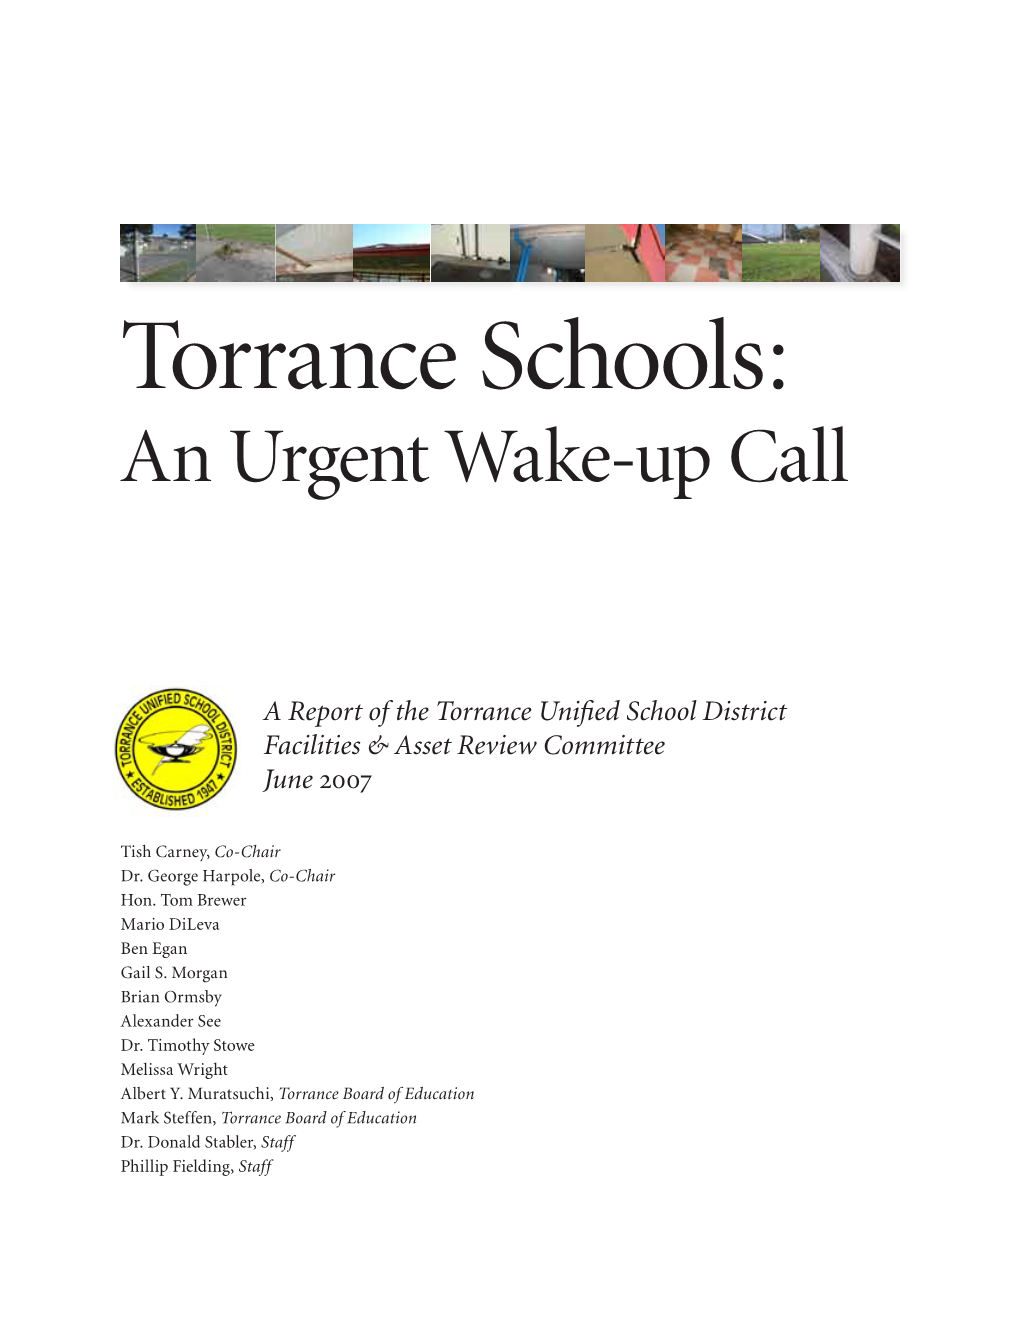 Report of the Torrance Unified School District Facilities & Asset Review Committee June 2007